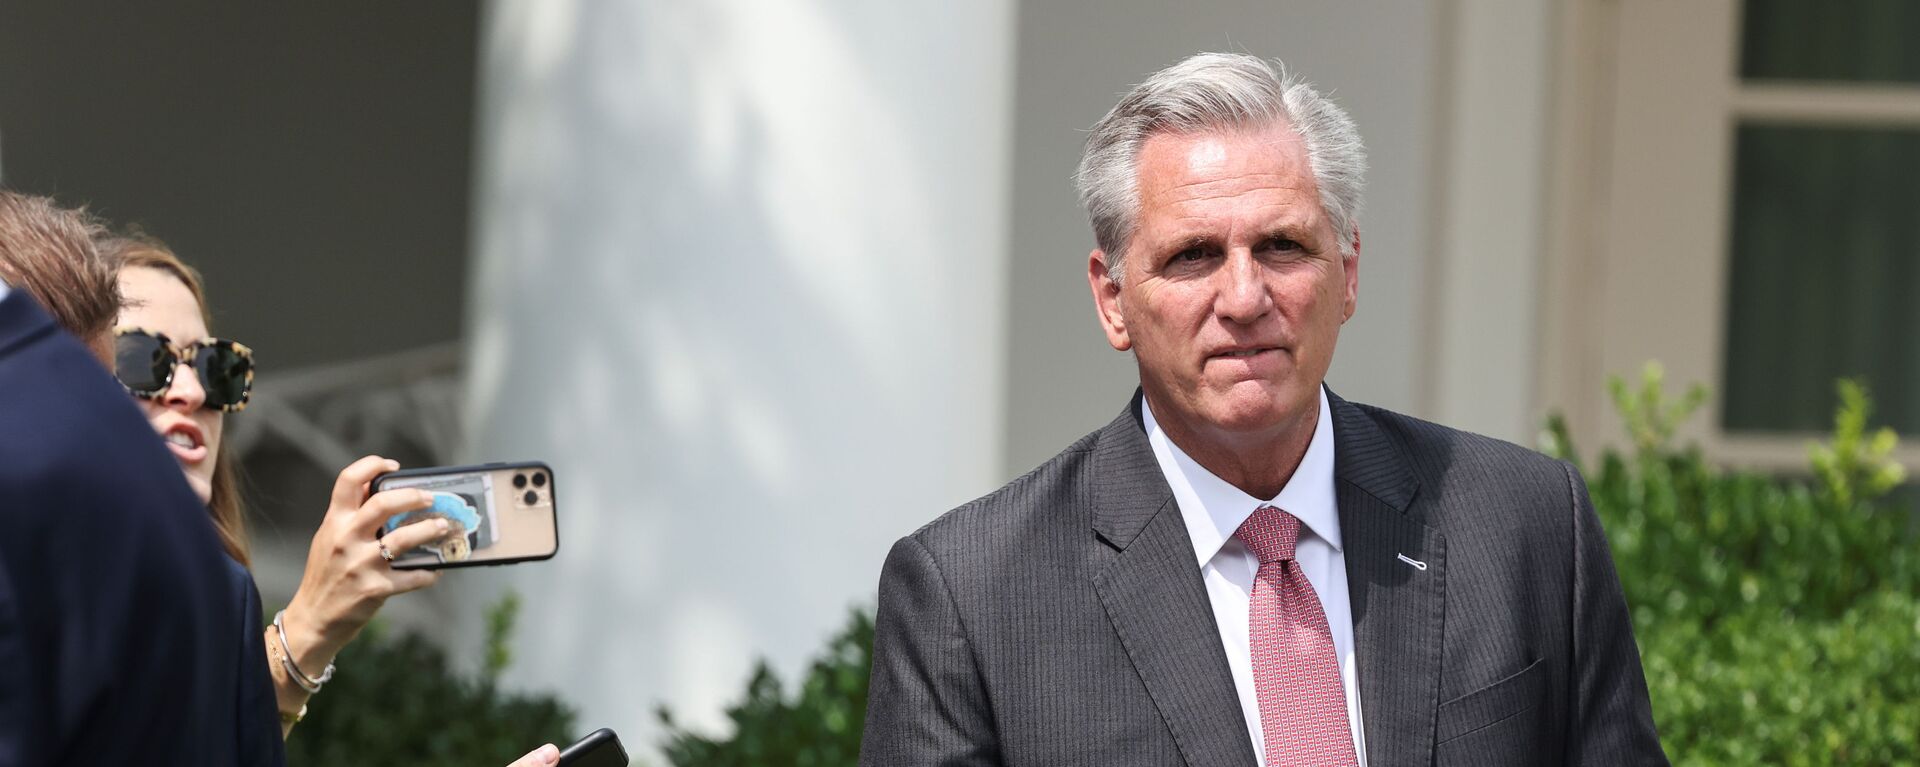 U.S. House Minority Leader Kevin McCarthy (R-CA) arrives for an event to celebrate the 31st anniversary of the Americans with Disabilities Act (ADA) in the White House Rose Garden in Washington, U.S., July 26, 2021 - Sputnik International, 1920, 26.07.2021